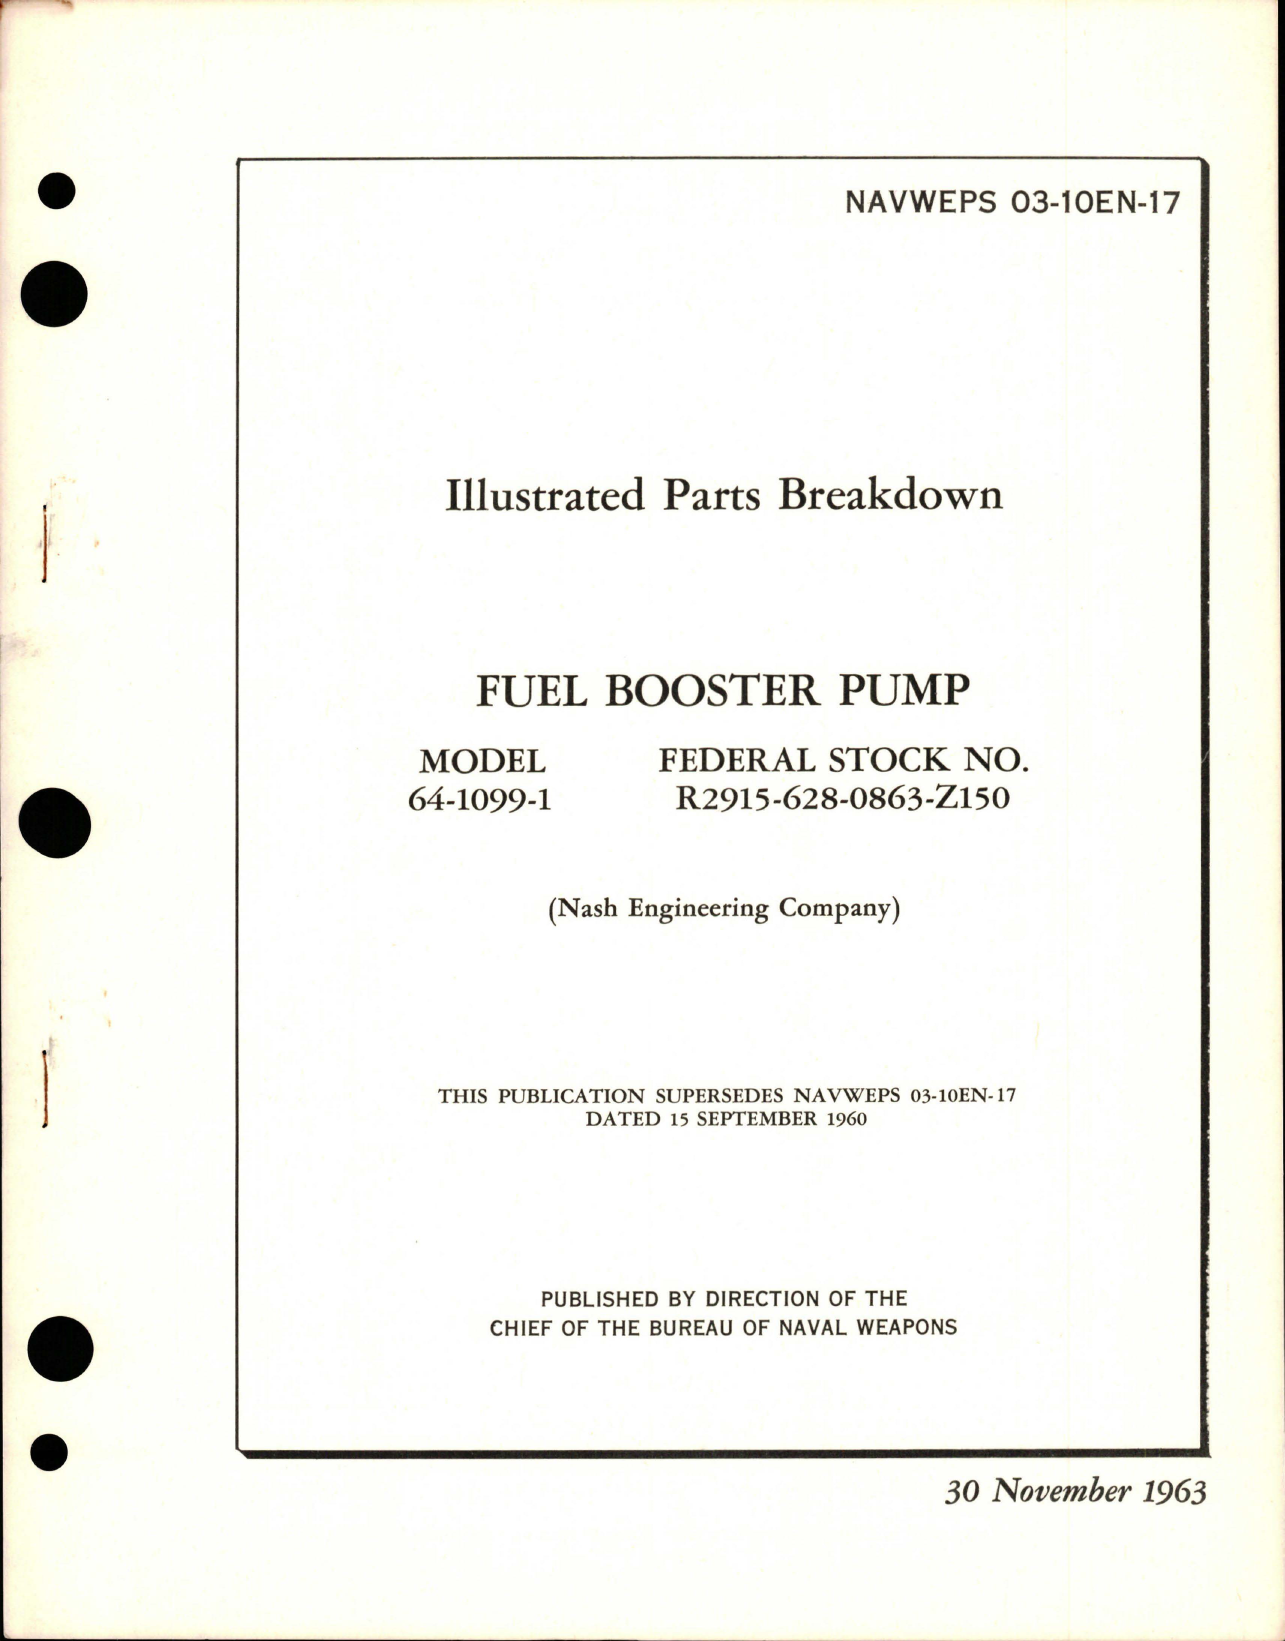 Sample page 1 from AirCorps Library document: Illustrated Parts Breakdown for Fuel Booster Pump - Model 64-1099-1